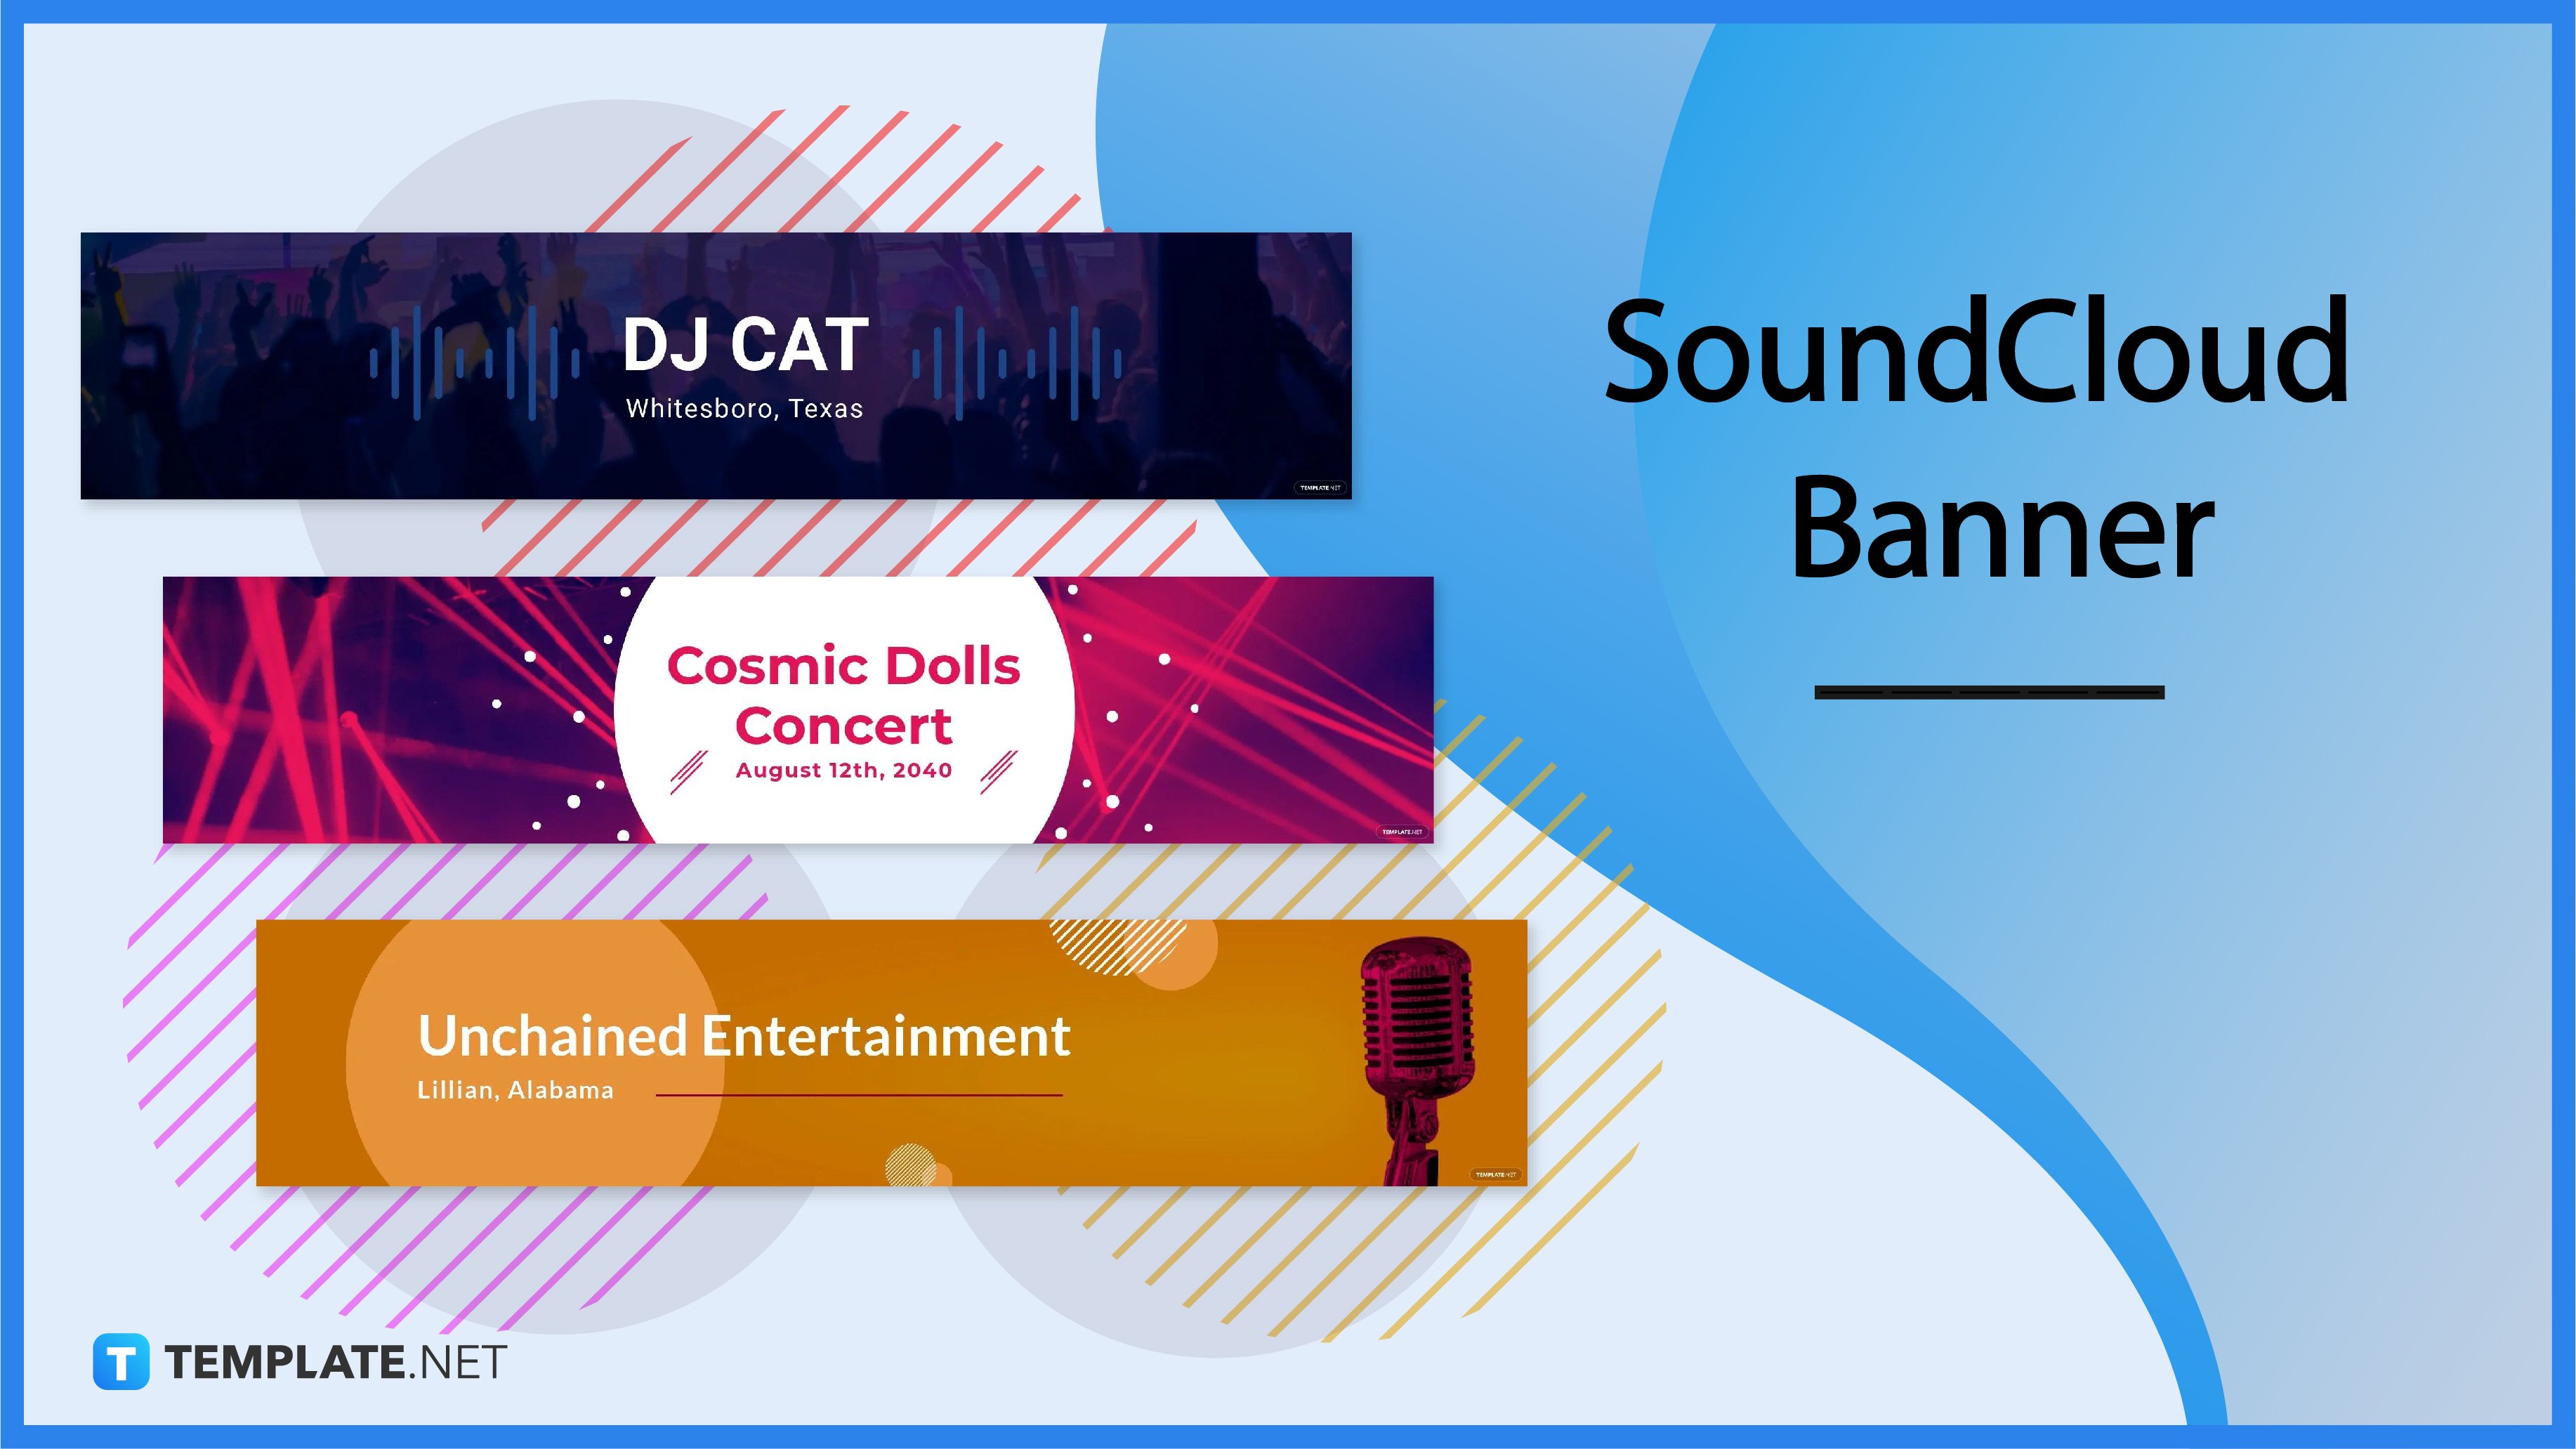 SoundCloud Banner What Is a SoundCloud Banner? Definition, Types, Uses